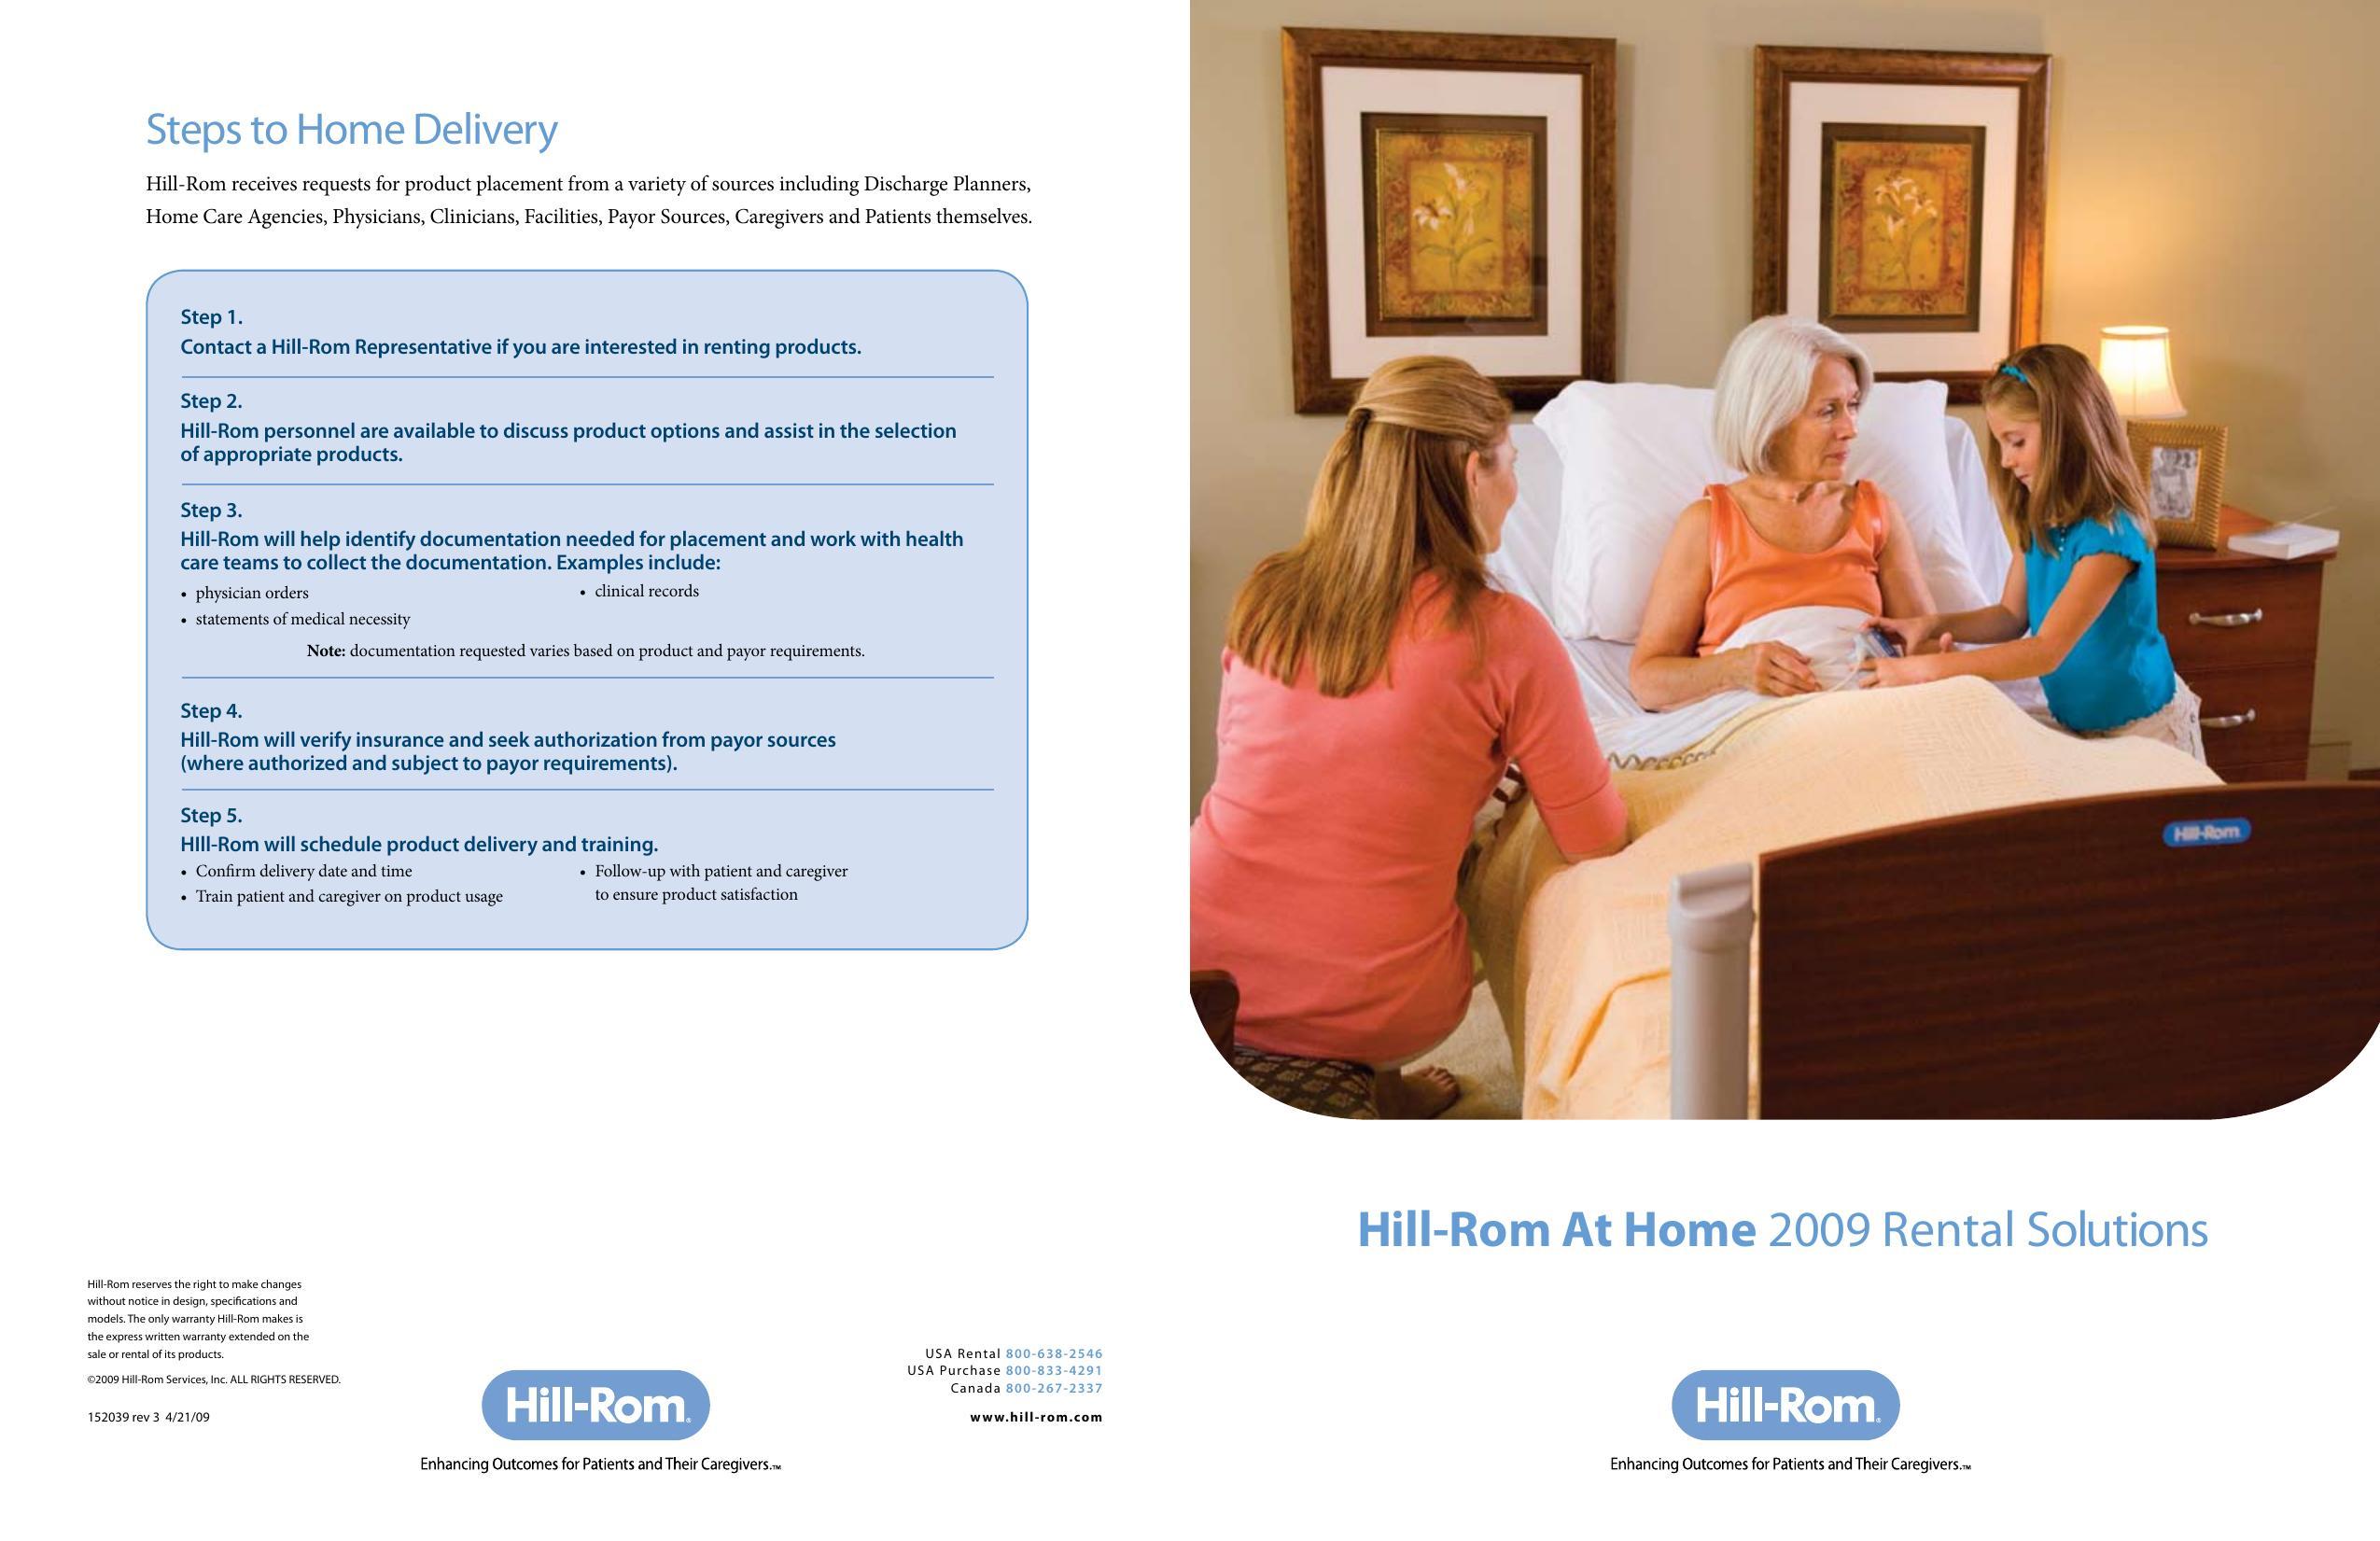 hill-rom-at-home-2009-rental-solutions.pdf